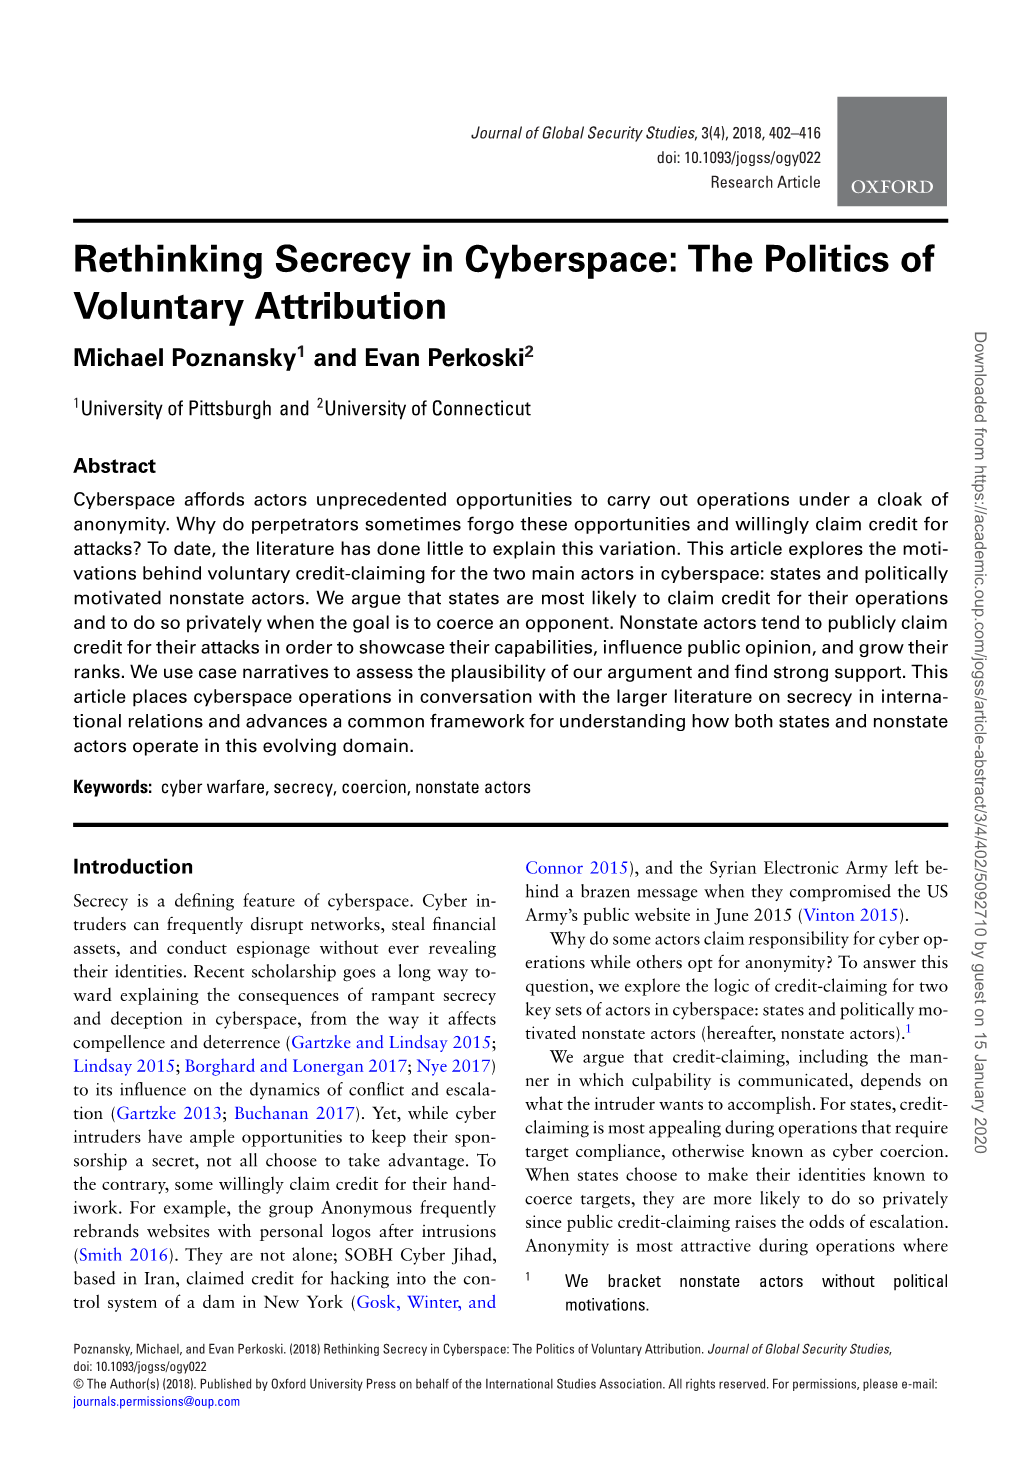 Rethinking Secrecy in Cyberspace